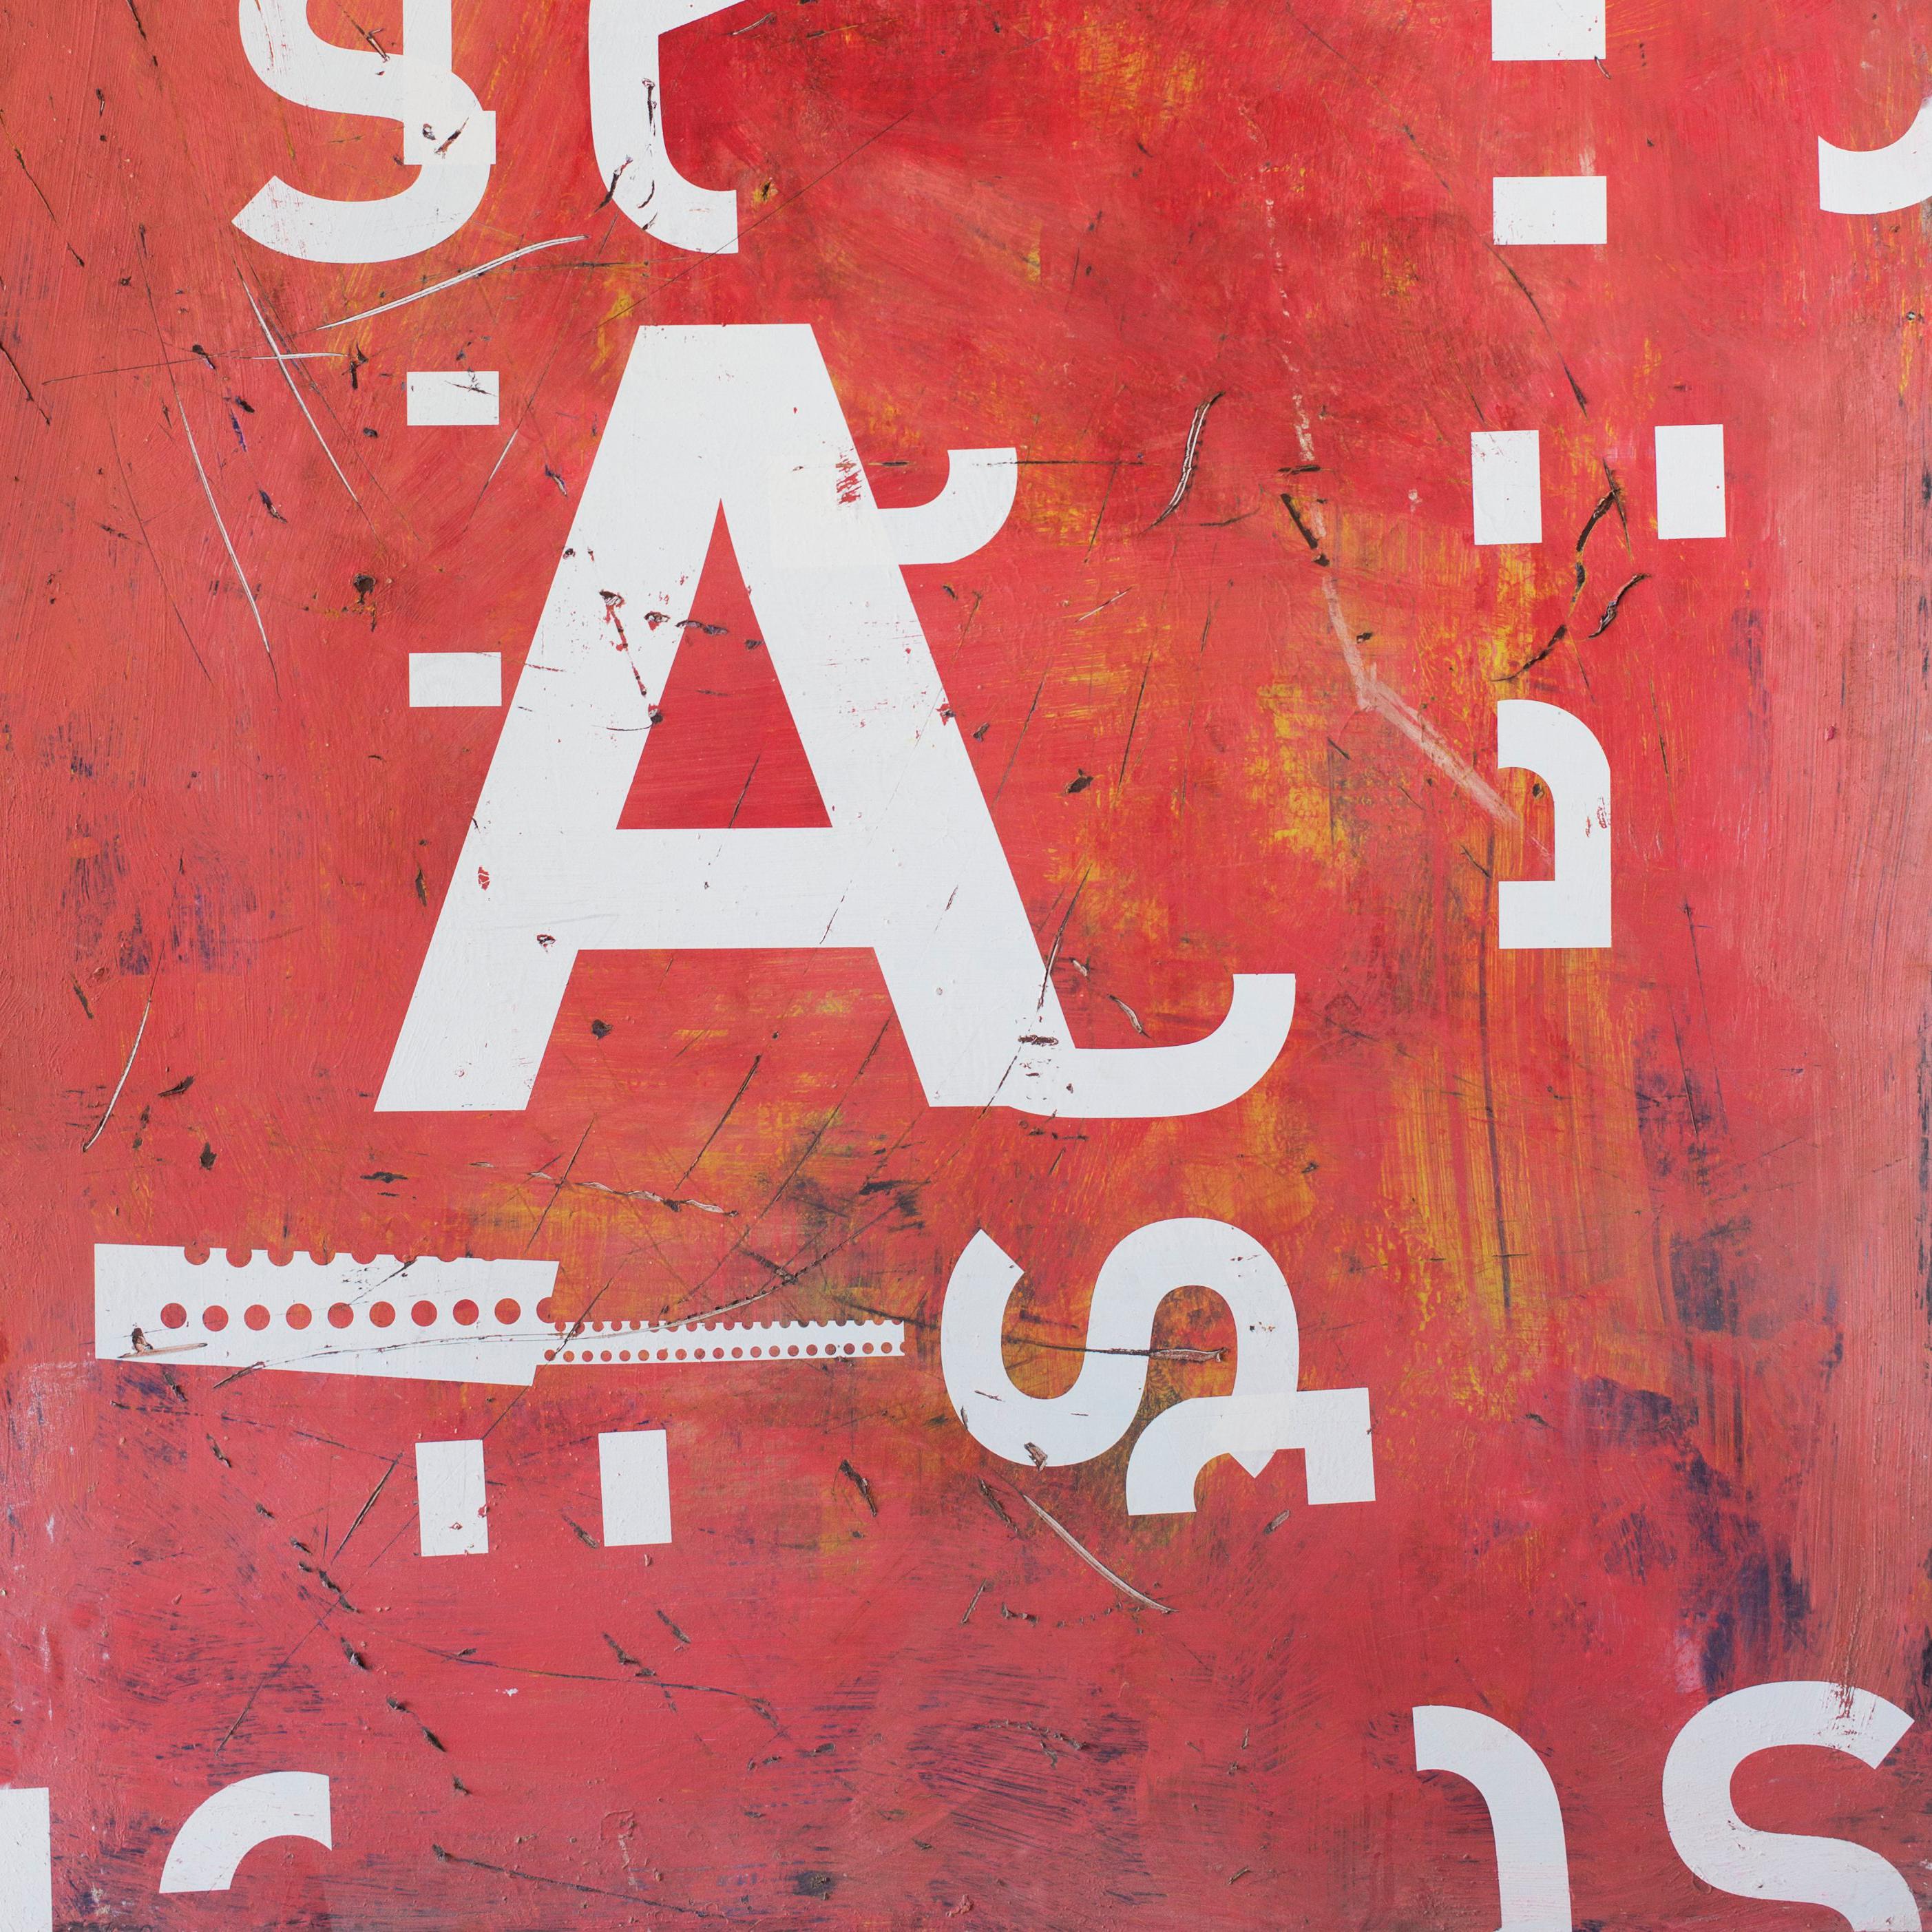 Grand AA (Typography series) by Ramon Enrich - large abstract painting, red For Sale 2